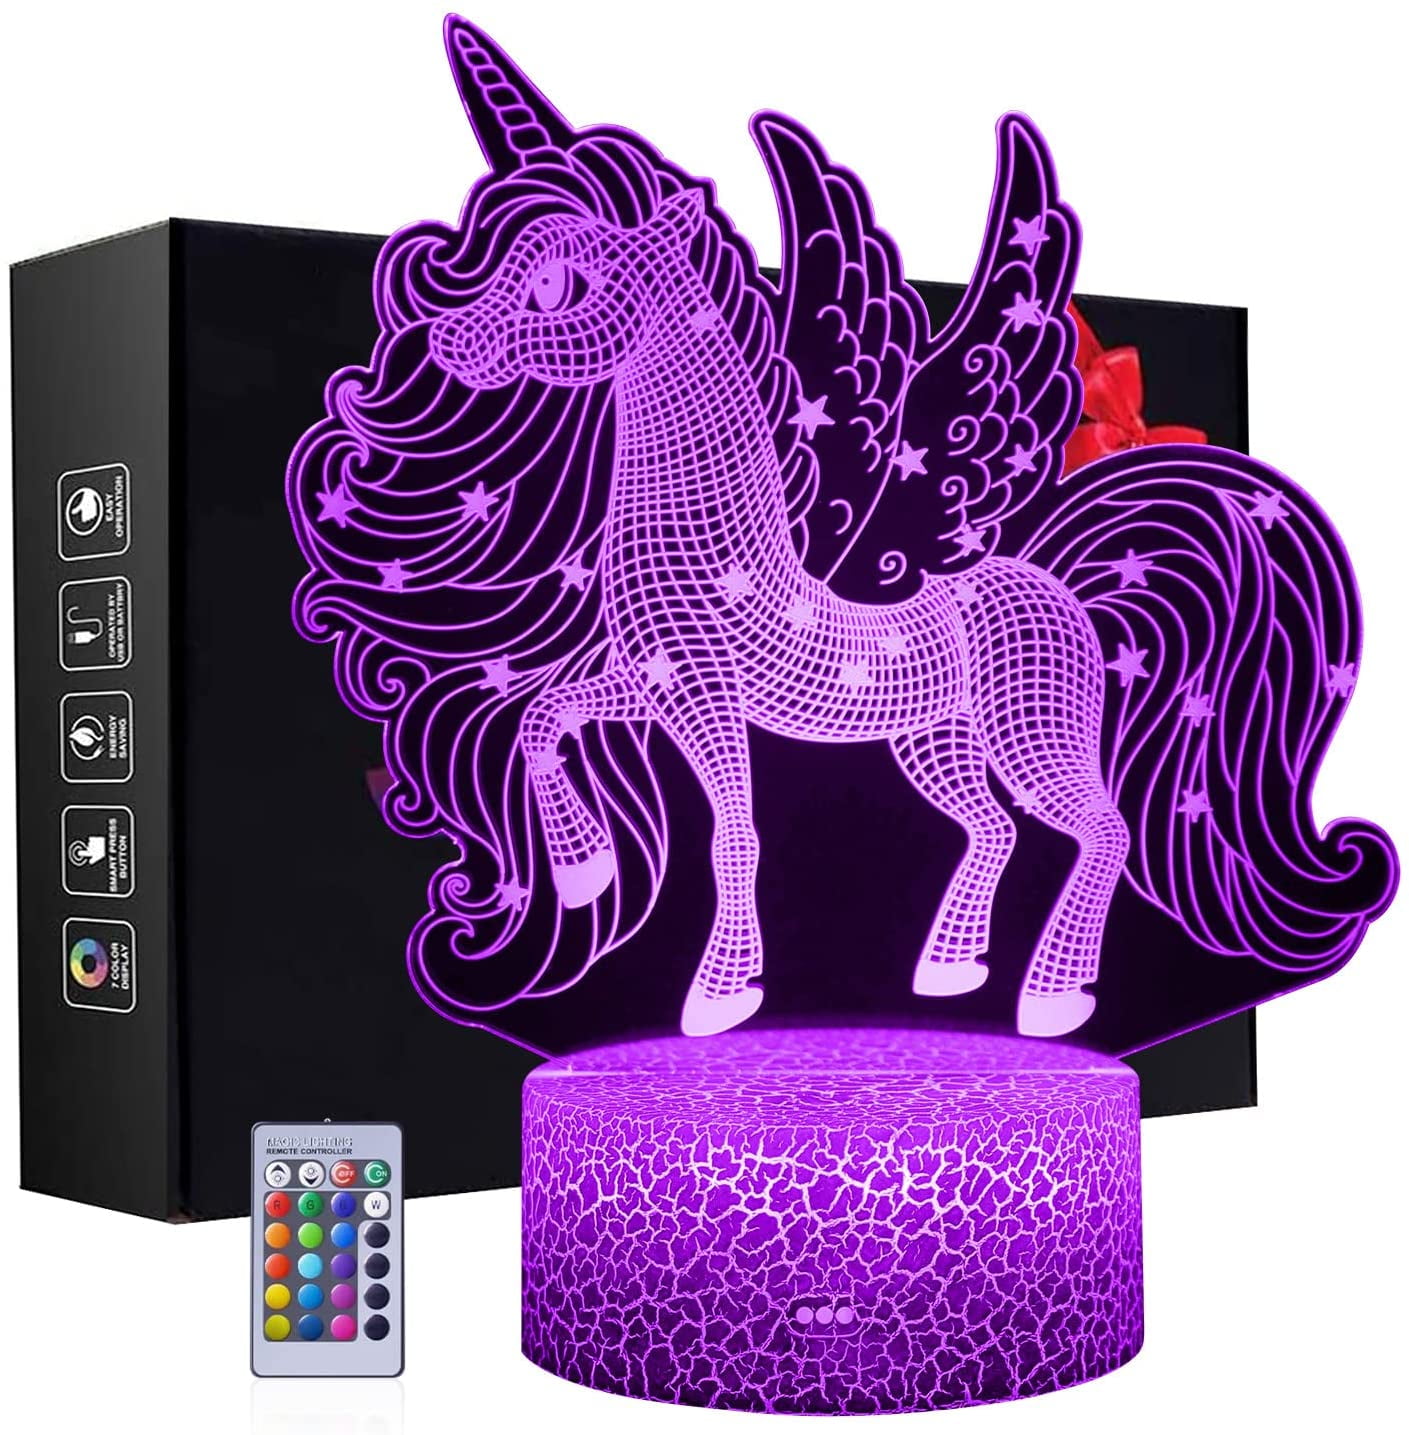 Details about   ⭐Unicorn 3D Night Light LED illusion Touch/Remote Color Changing Lamp Kids Gifts 